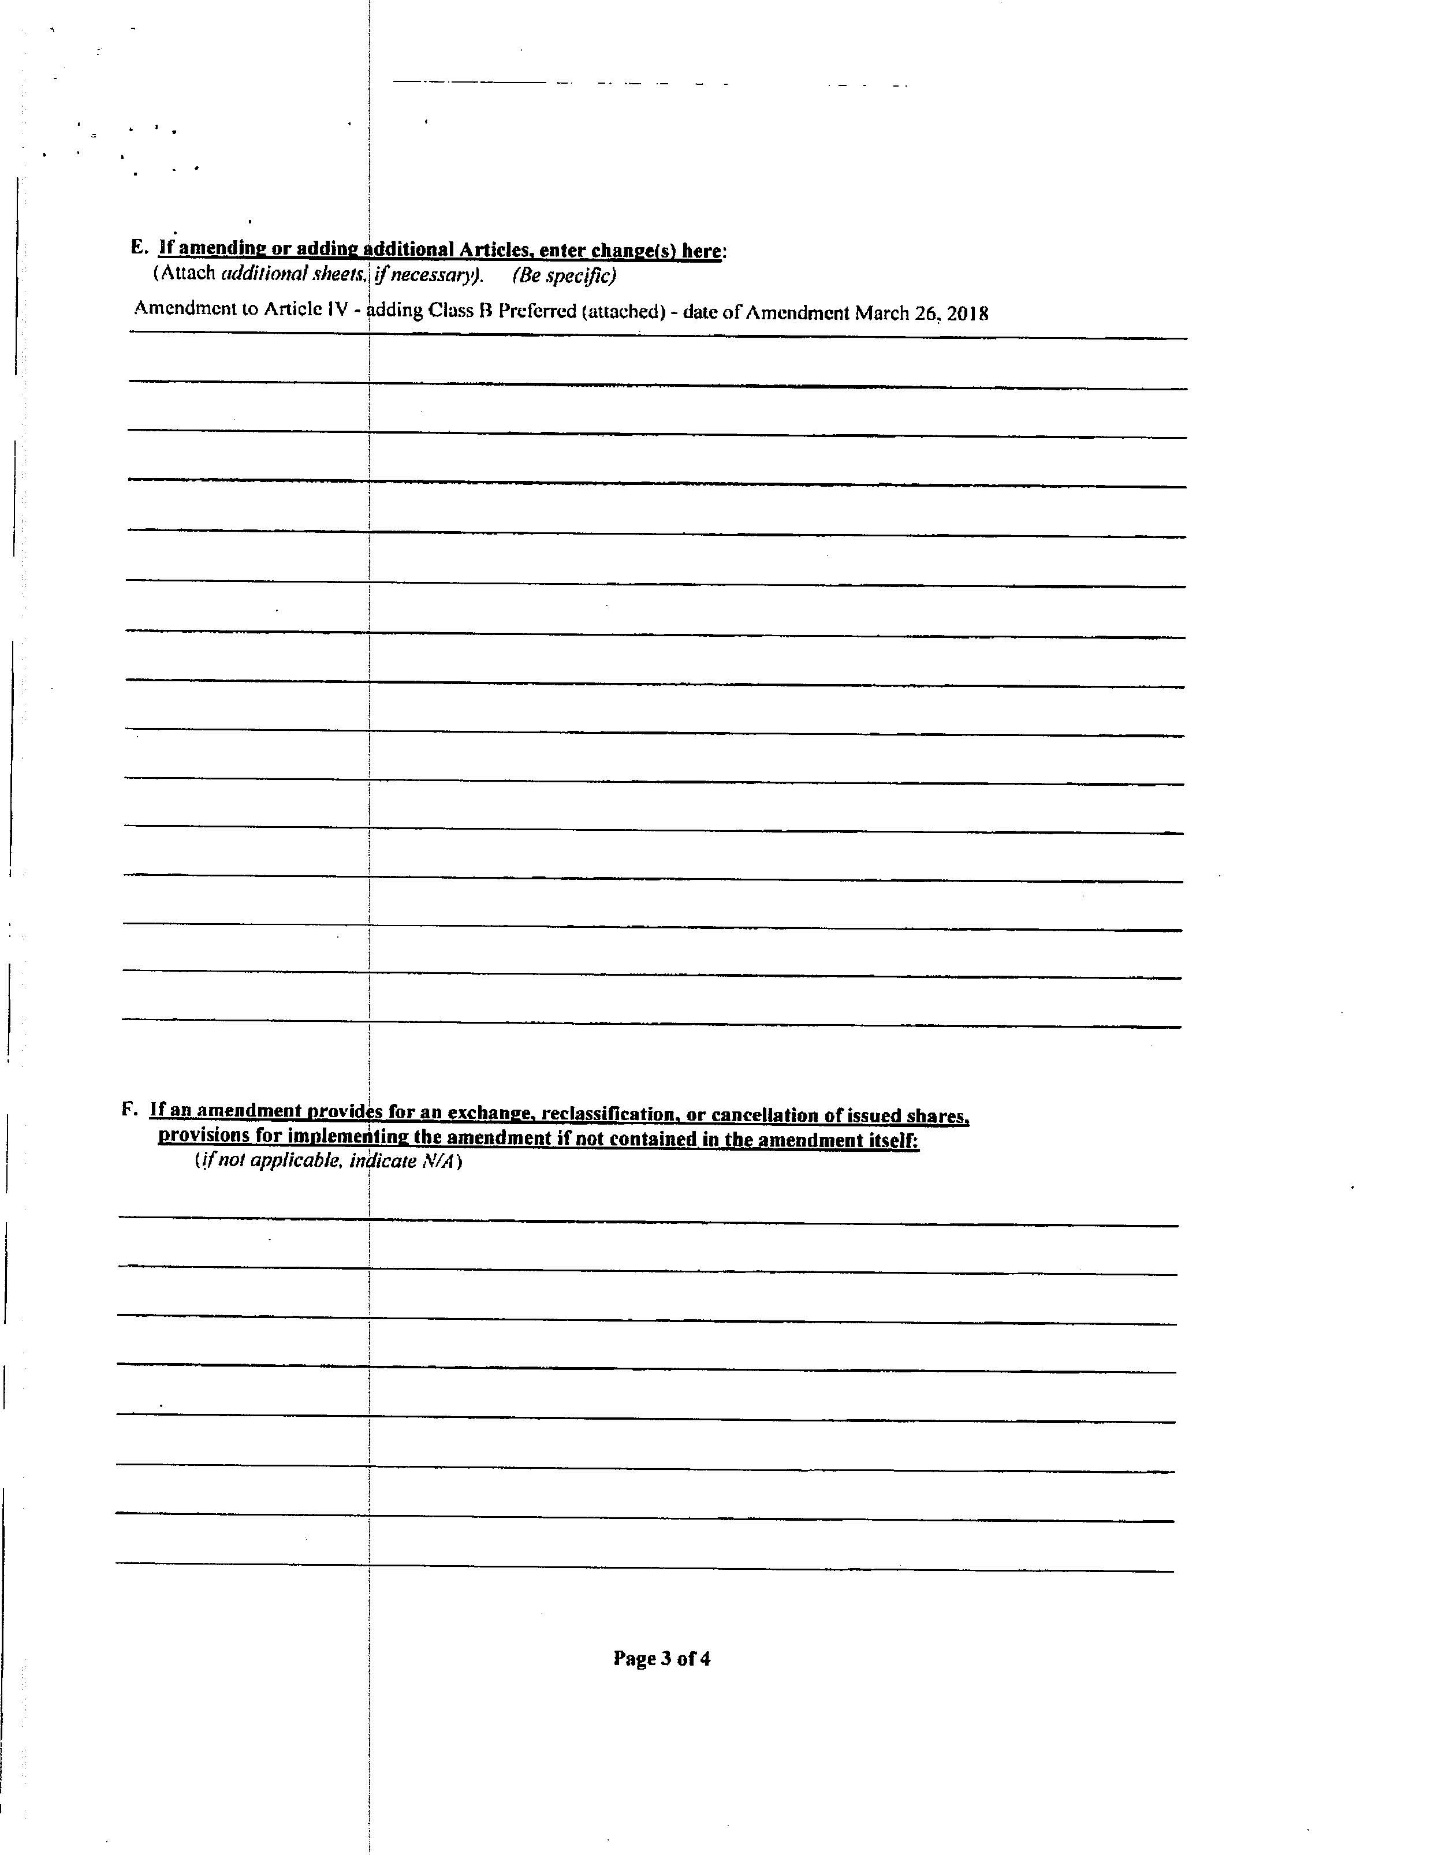 Third Amended Articles of Incorporation_Page_05.jpg